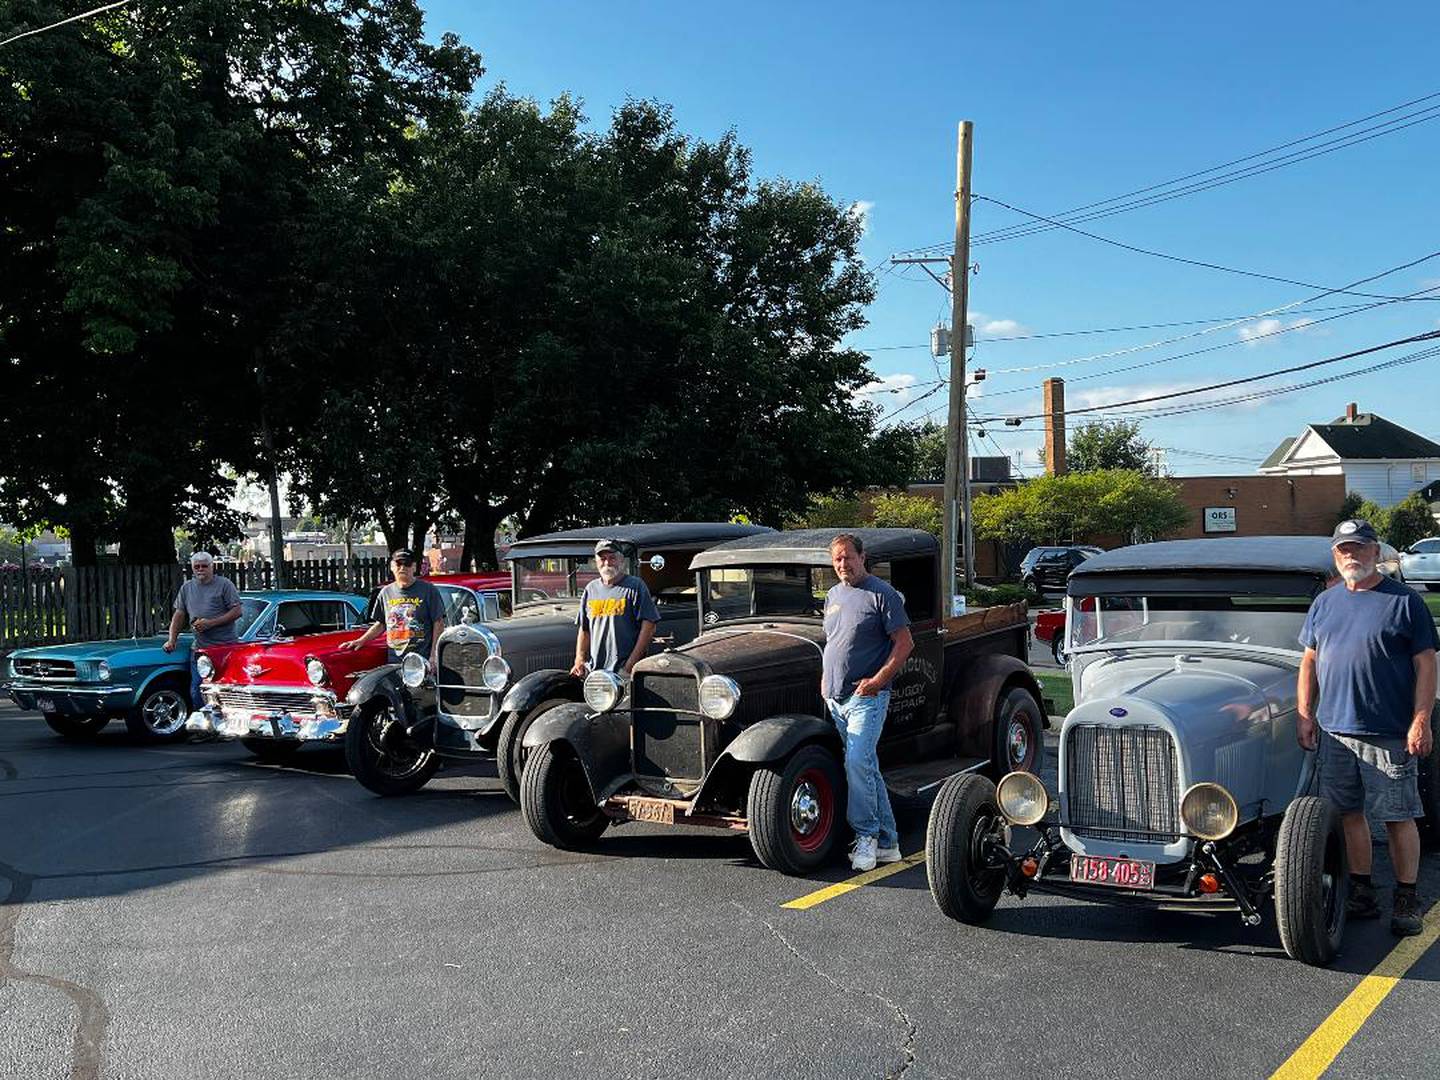 The weekly gathering of vintage car enthusiasts includes, from left, Mike Berogam, 71 of Dixon and his 1964 Ford Mustang, Steve Ketchum, 67 of Amboy and his 1956 Chevy Nomad wagon, Jim Ross, 73, of Grand Detour and his Ford Model A truck, Larry Ellingsen, 71 of Elmhurst and his Ford Model A truck; and Al Reece, 72, of Dixon and his 1929 Ford Model A truck.